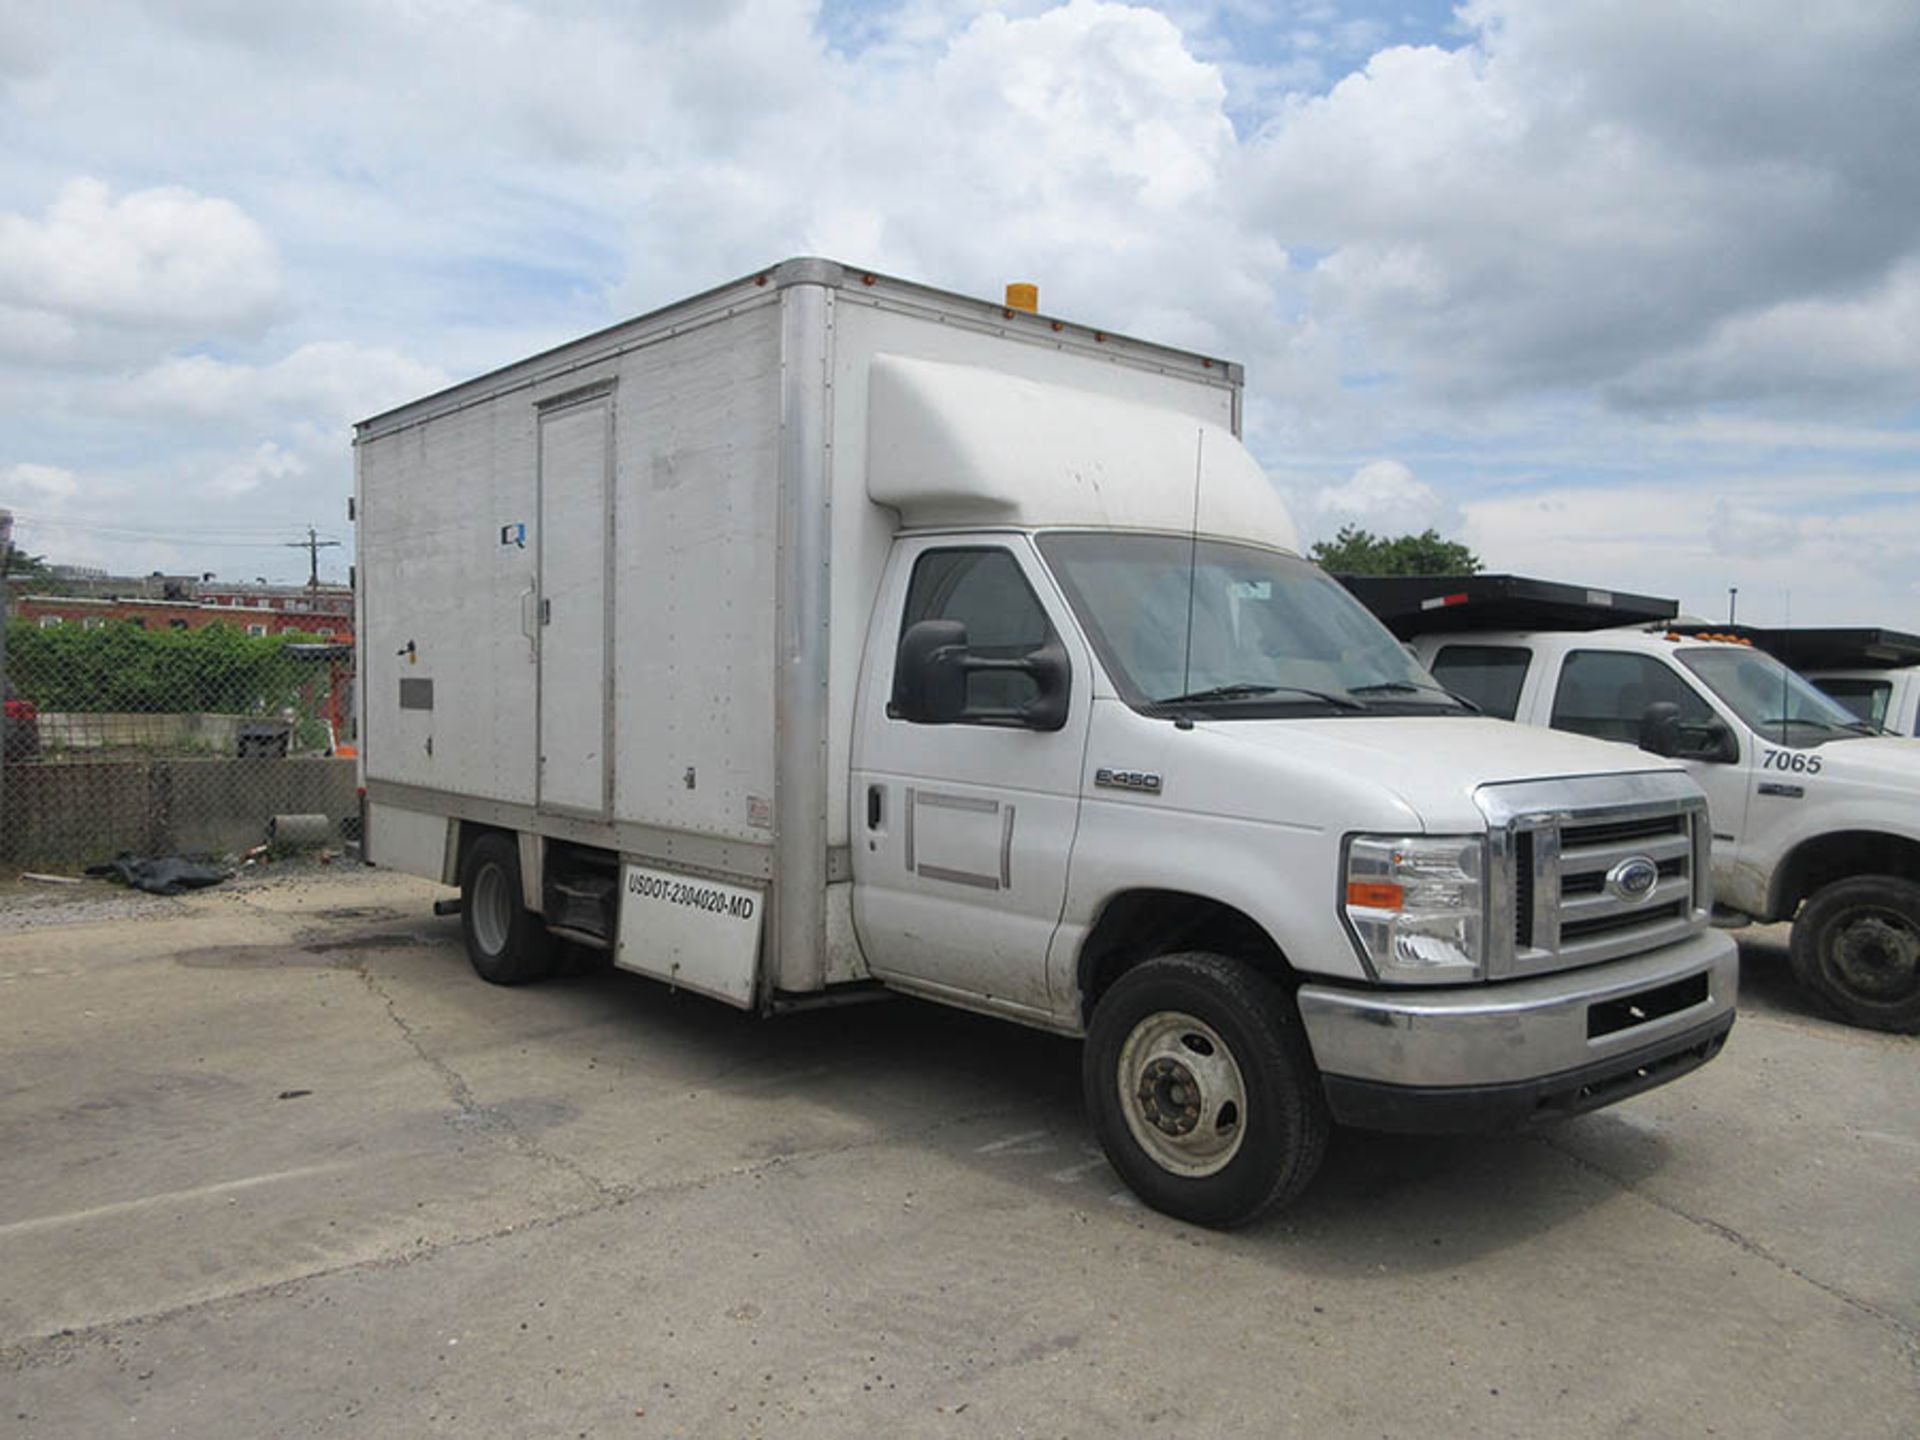 (2013) FORD E450 SUPER DUTY CCTV TRUCK, AUTOMATIC TRANSMISSION, 86,810 MILES, MAIN LINE HOSE REEL, - Image 2 of 9